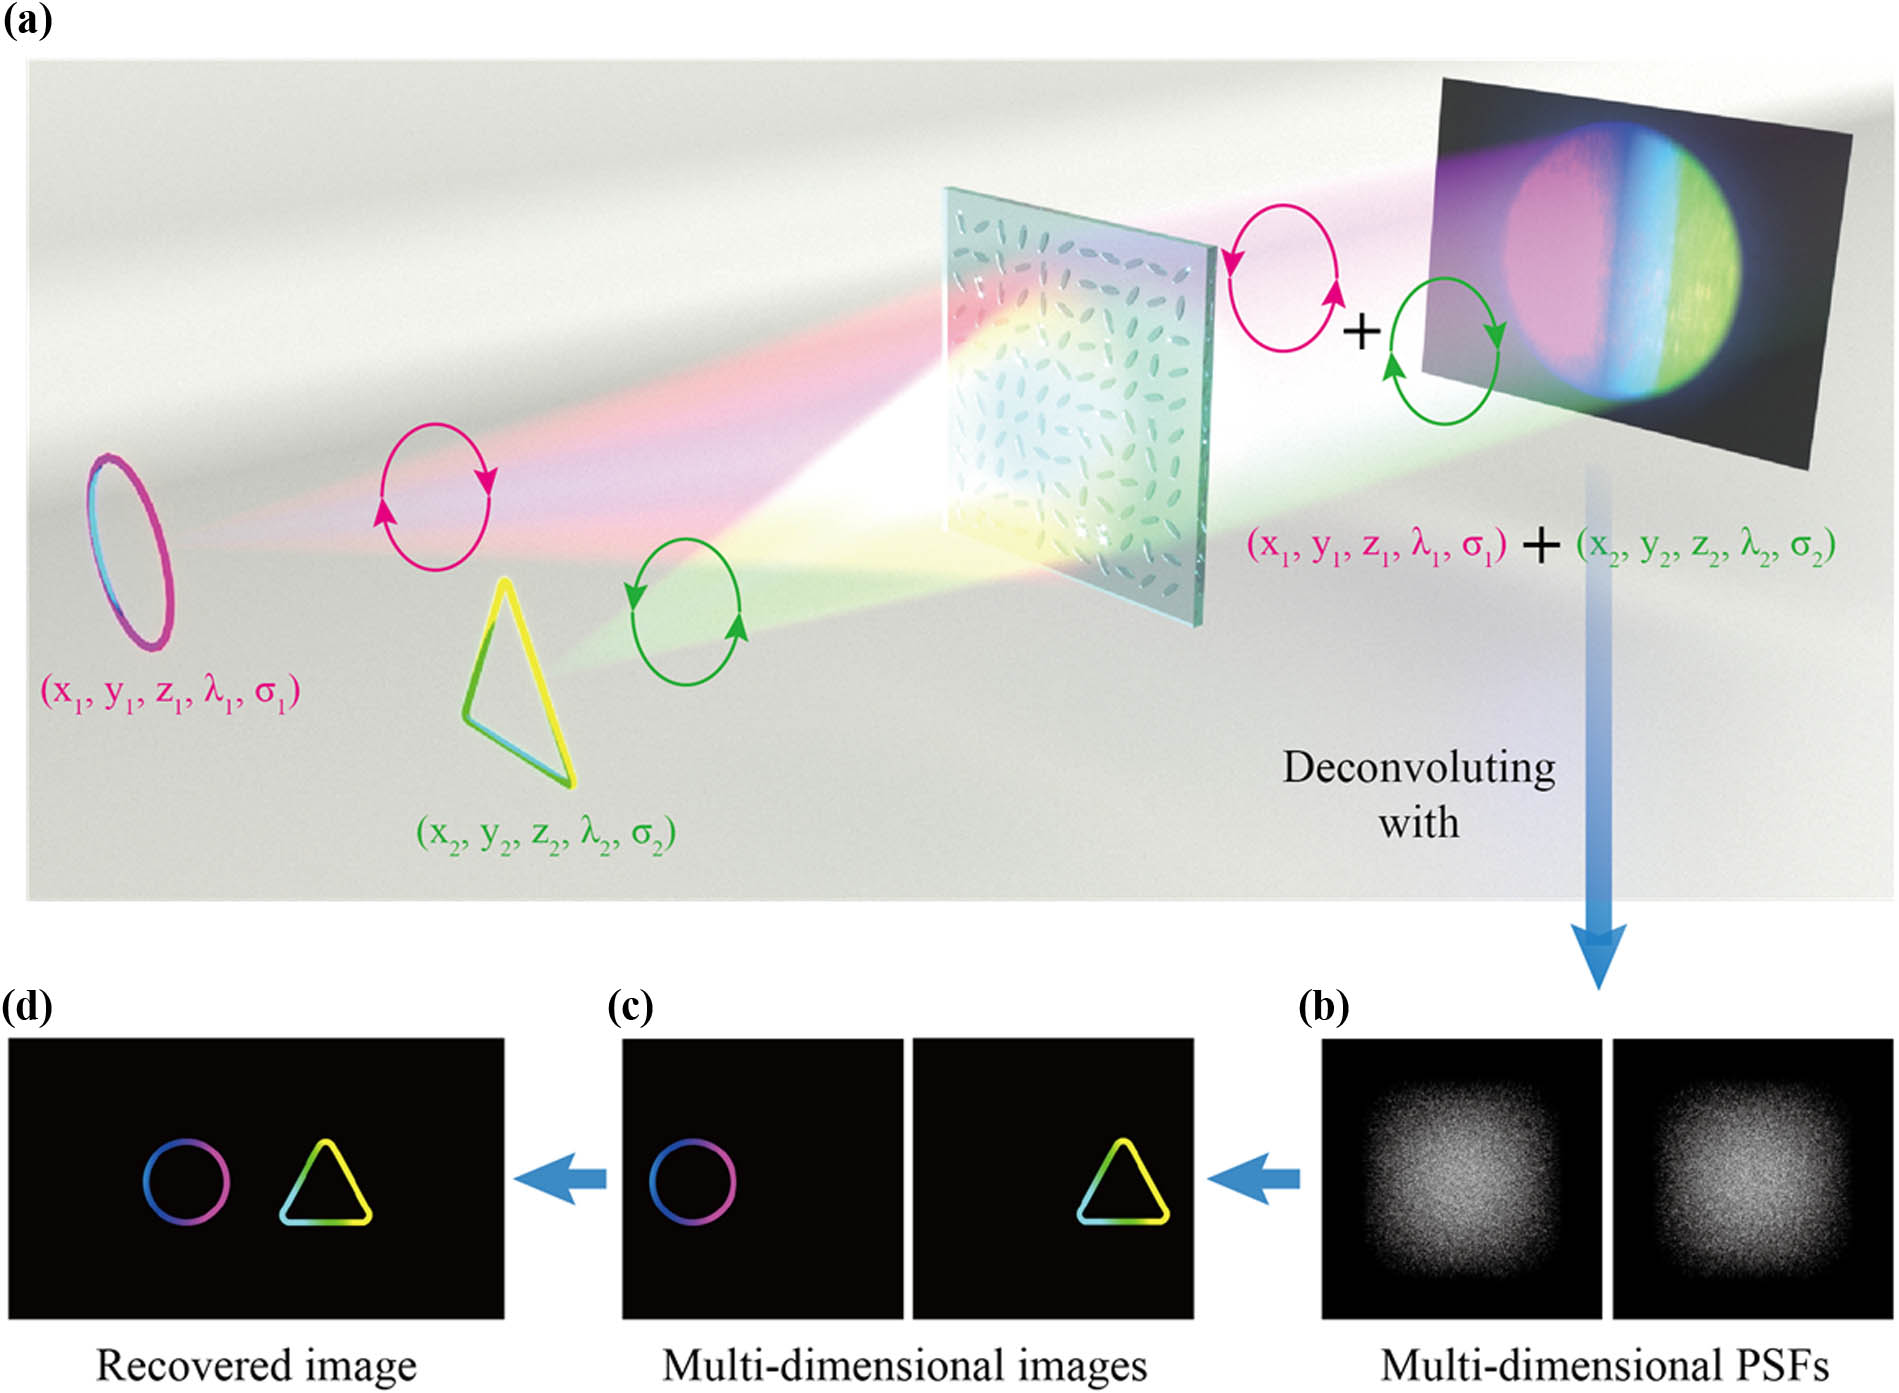 Schematic of the spatial–spectral–polarization meta-optical imaging system. (a) Light from two multispectral objects with different spatial and polarization (left, left-circularly polarized; right, right-circularly polarized) information propagating through the designed LC metasurface diffuser generates a speckle pattern on a monochromatic camera. (b) Speckle patterns produced by two-point objects with respective spatial and polarization information of the two multi-dimensional objects, taken as corresponding multi-dimensional PSFs. (c) Reconstructed multi-dimensional images from the monochromatic speckle images using corresponding PSFs. (d) The recovered image of the two objects by superimposing individual reconstructed images.